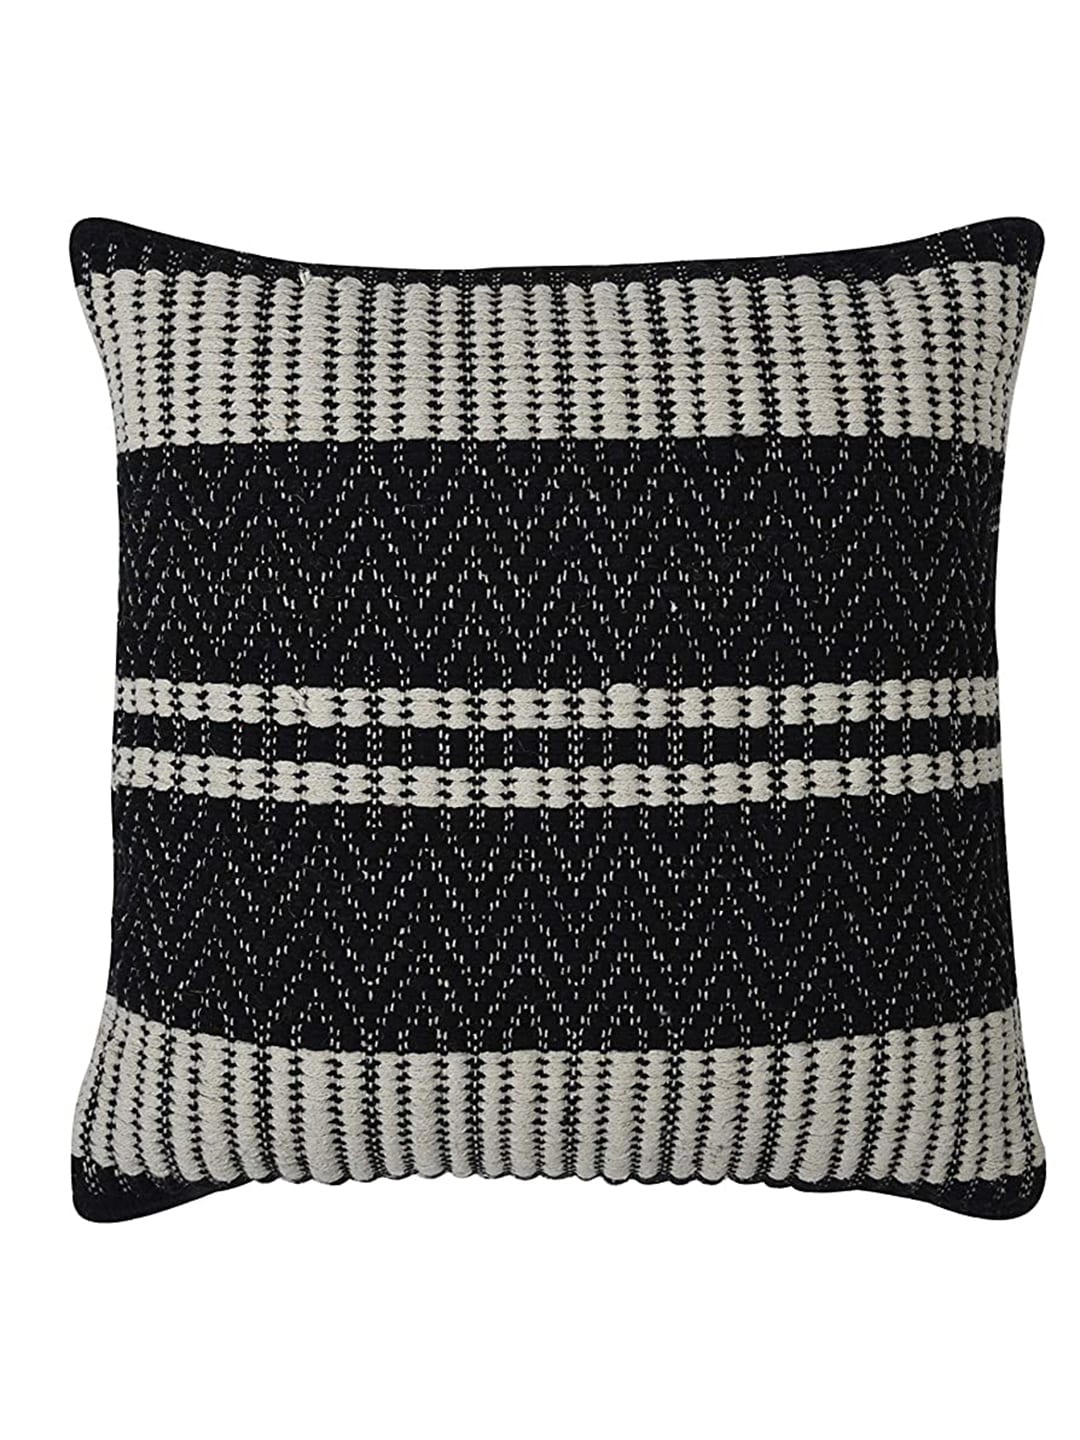 HERE&NOW Black & White Geometric Square Cushion Cover Price in India